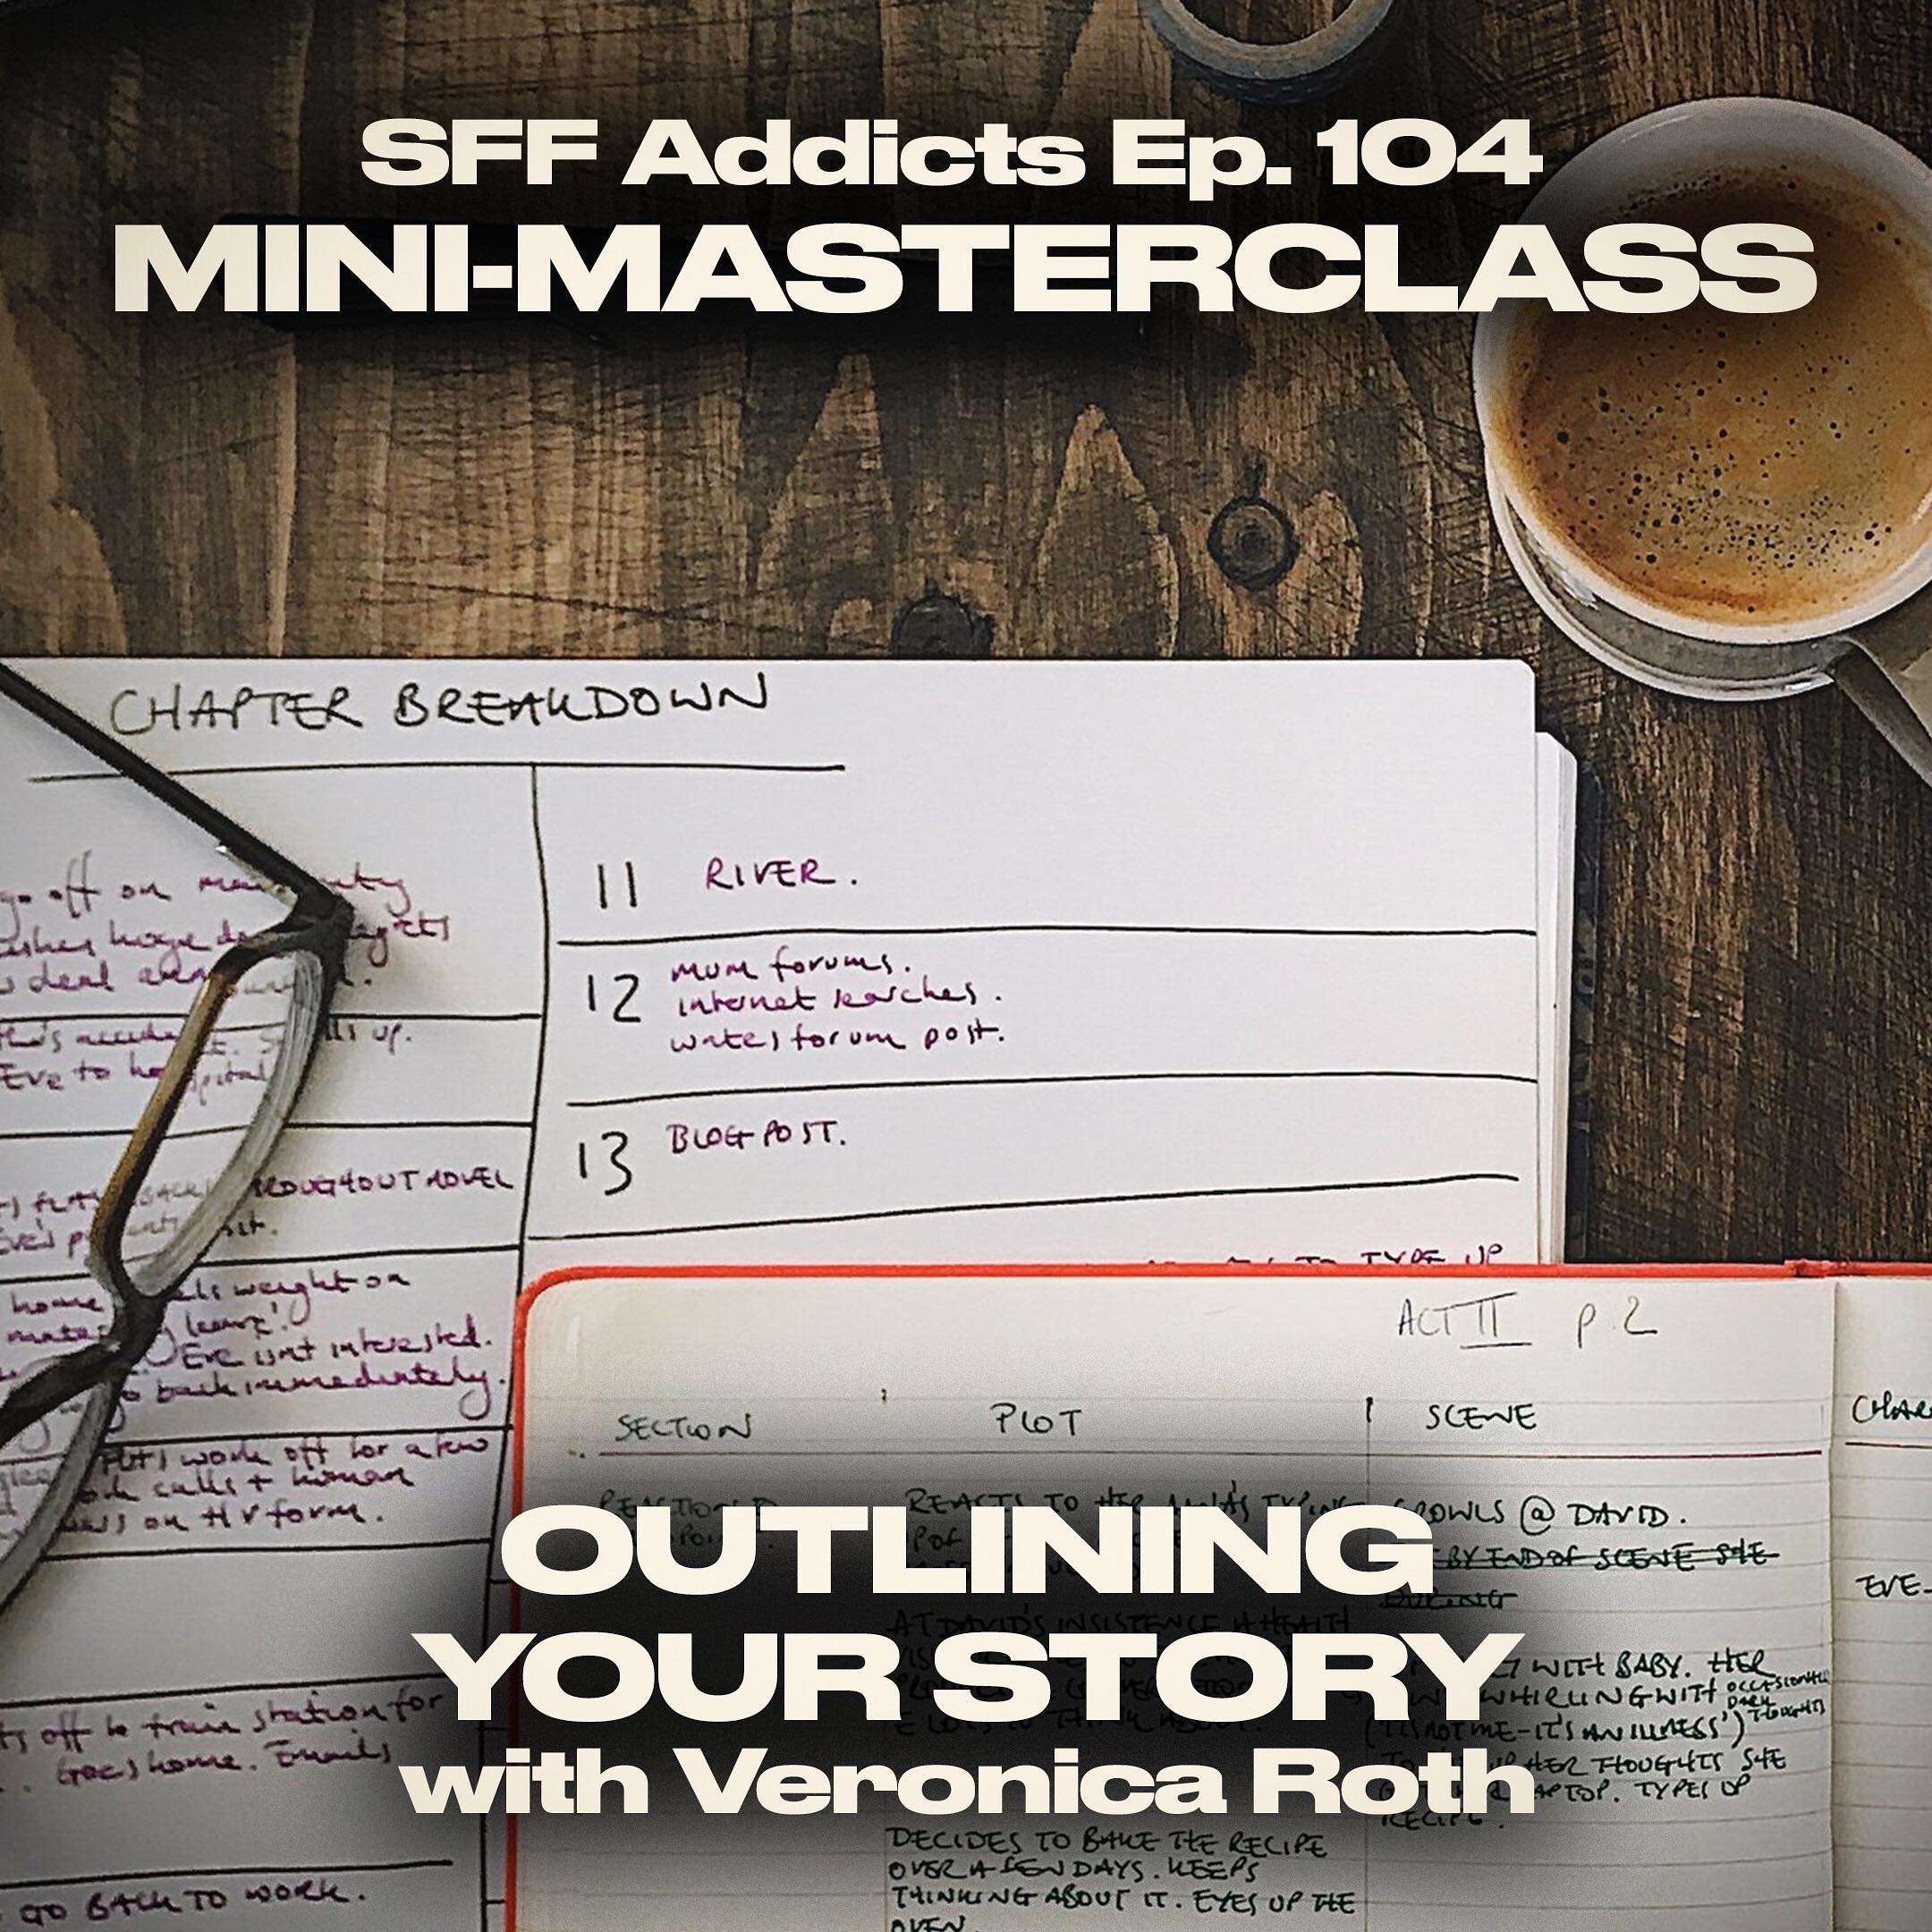 Ep. 104 of @sffaddictspod is LIVE! Join bestselling author @veronicaroth, my co-host @mjkuhnbooks and I as we deconstruct approaches to outlines in our masterclass on Outlining Your Story.

And don&rsquo;t forget, you can support SFF Addicts through 